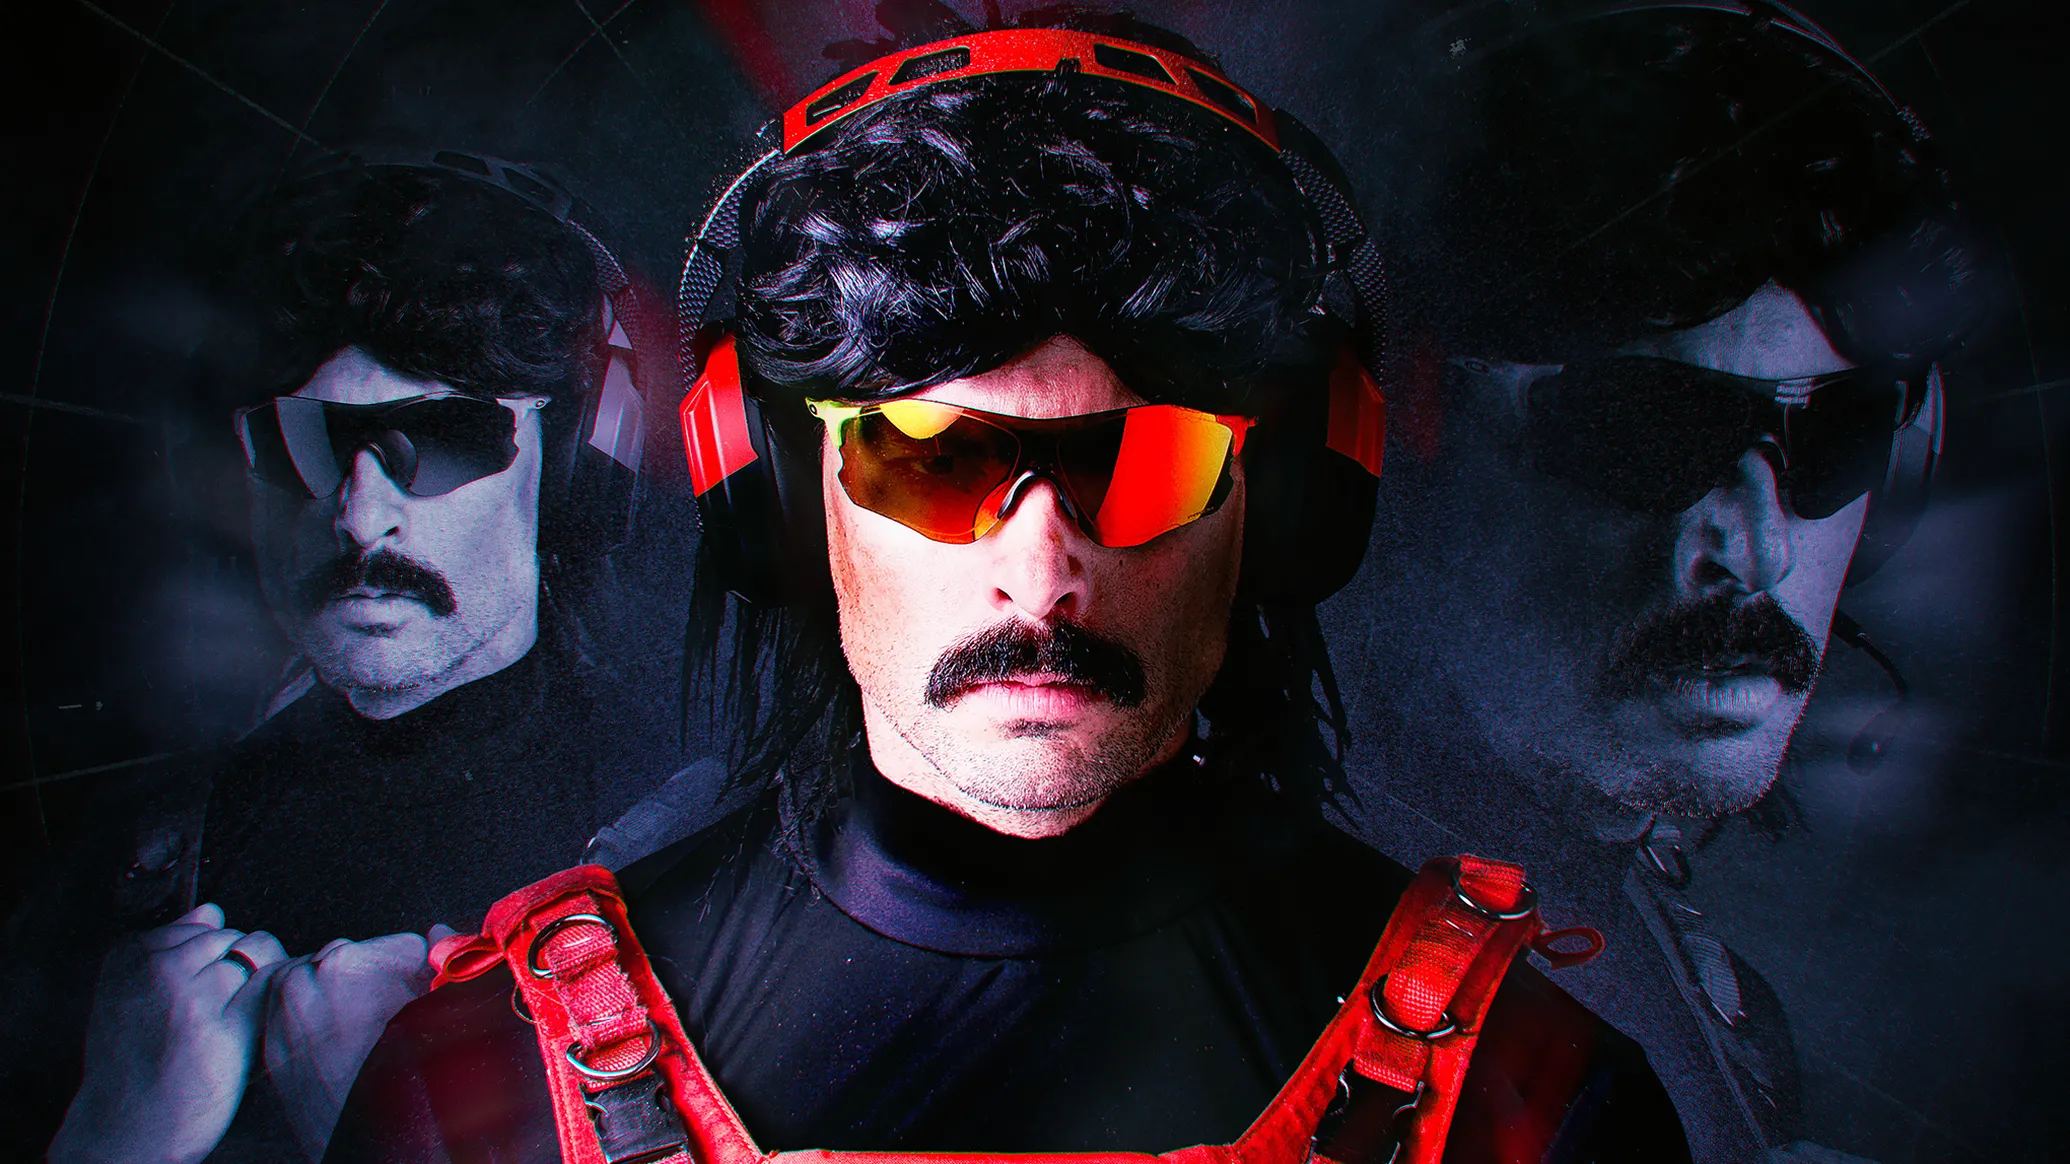 Image of the Doc